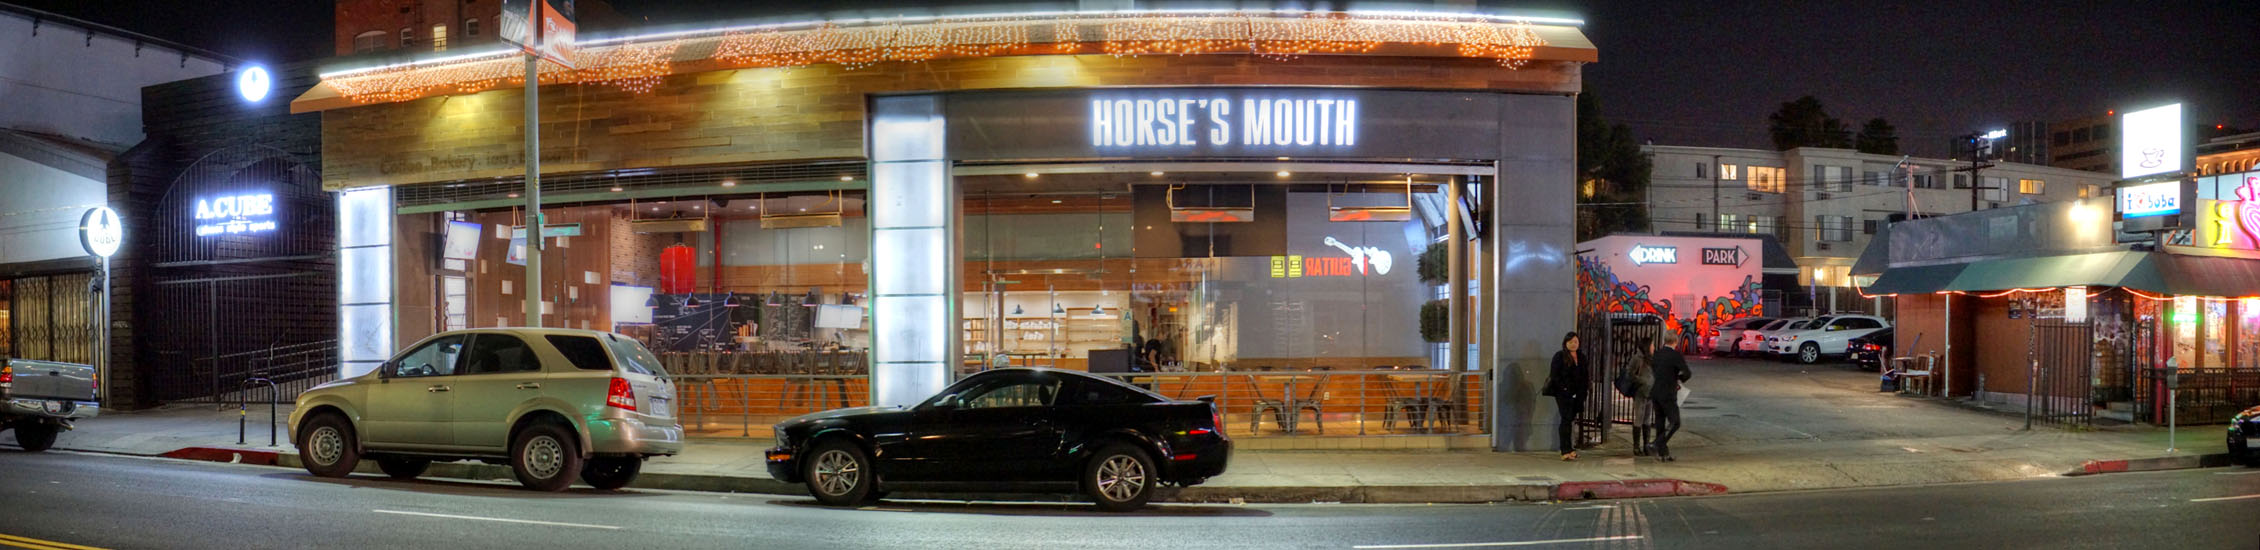 Horse's Mouth Exterior